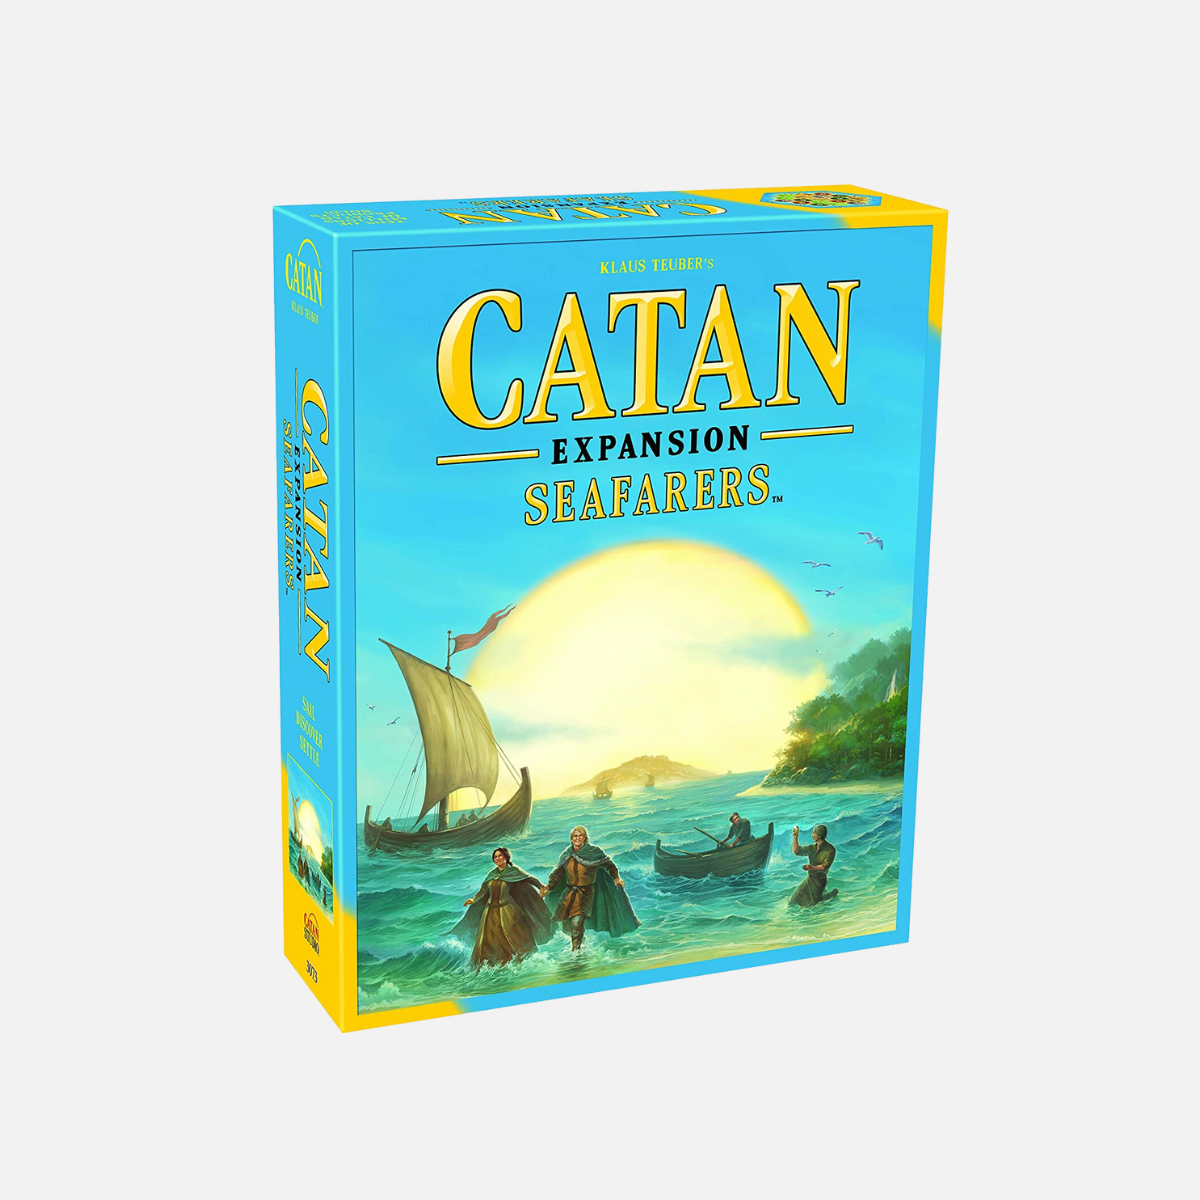 Catan Seafarers Expansion 5th Edition board game